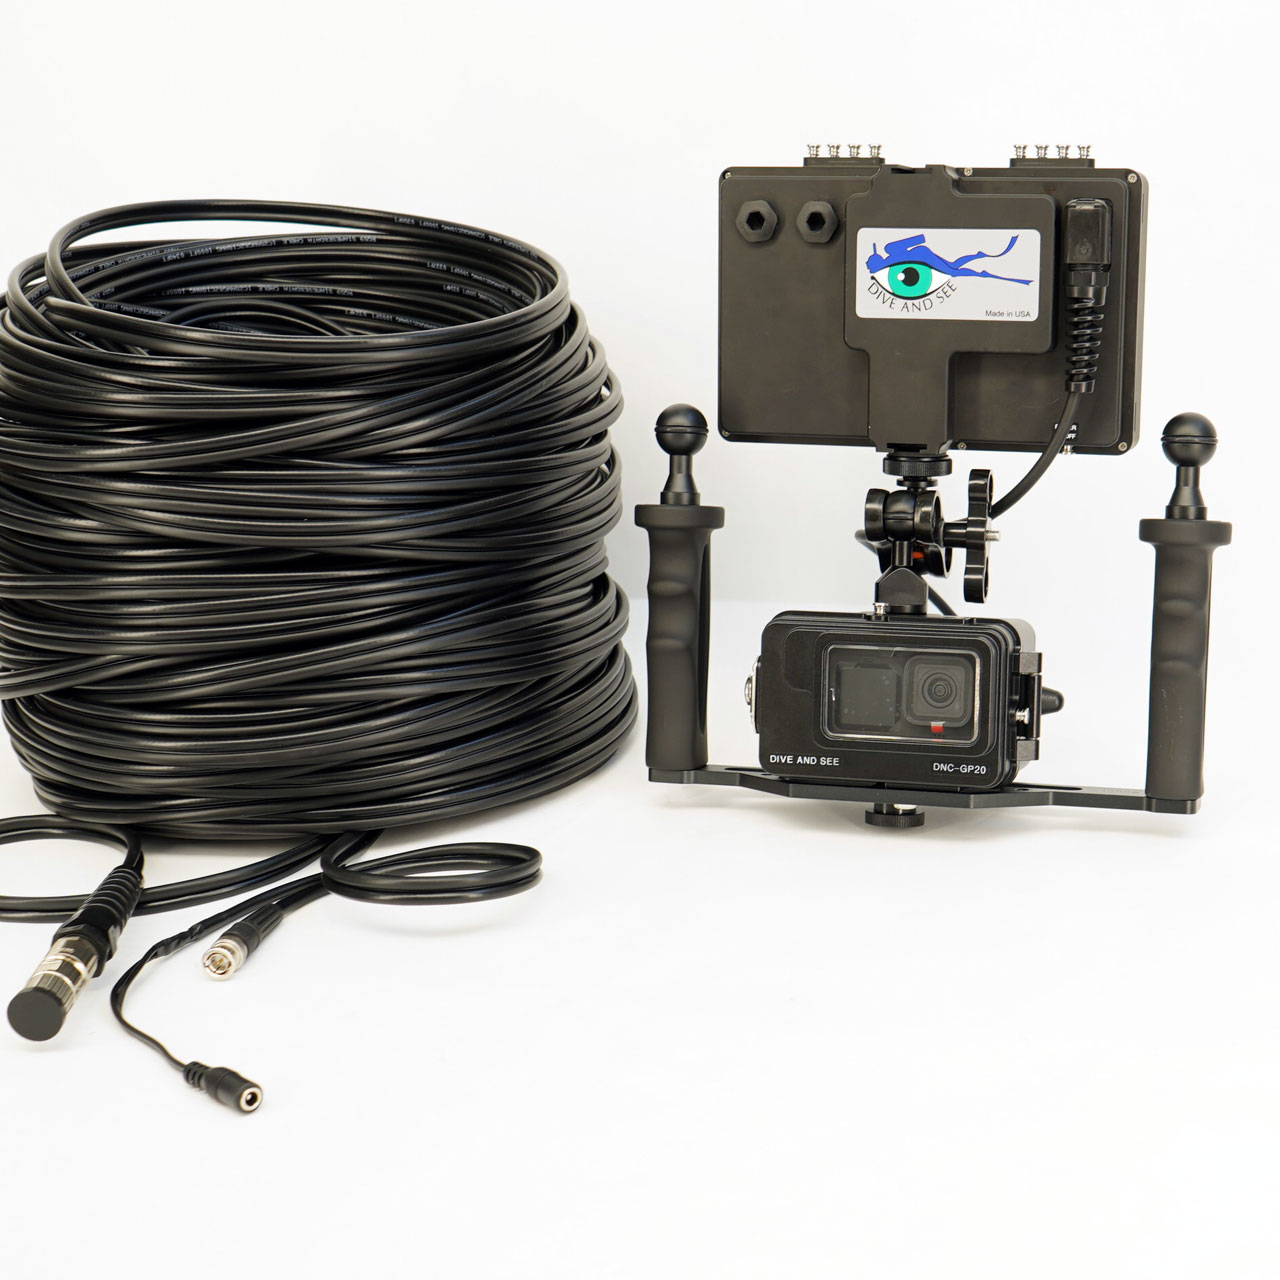 HERO 12 Live View up to 100m detachable SDI/Power cables, Monitor. Precise  Underwater video inspection